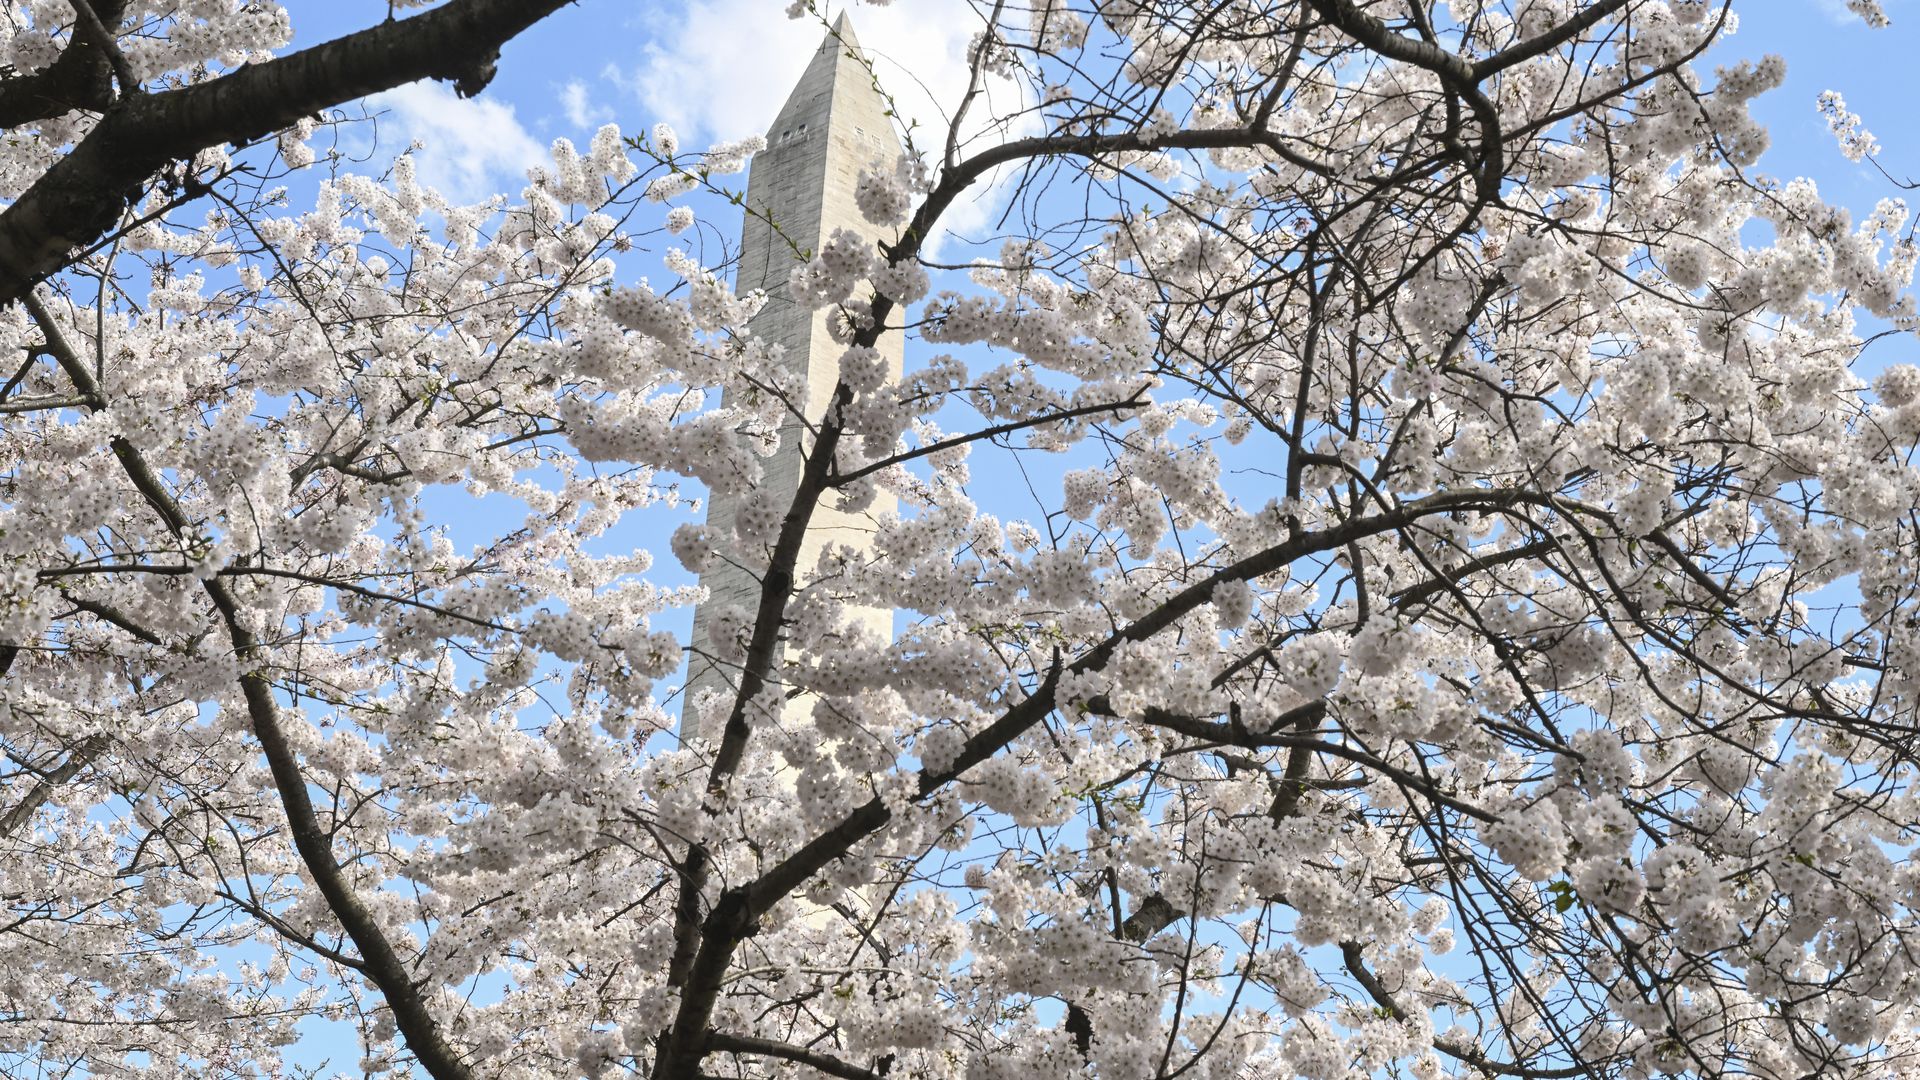 Chasing the Cherry Blossoms  Following Peak Bloom in Japan